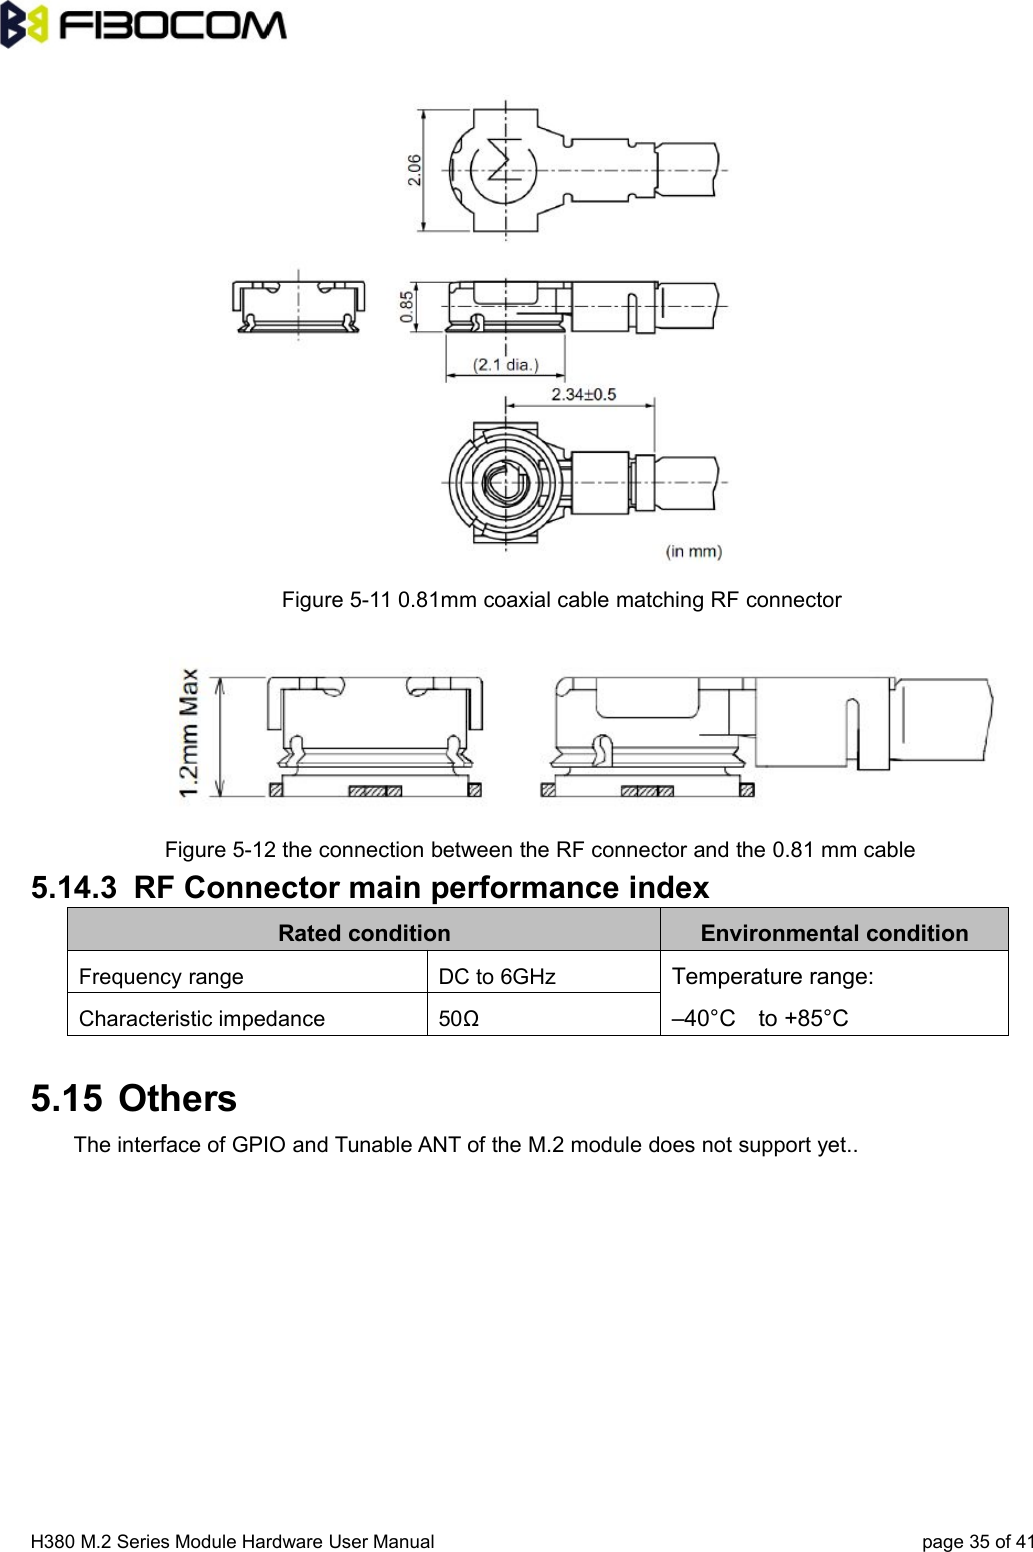 H380 M.2 Series Module Hardware User Manual page 35 of 41Figure 5-11 0.81mm coaxial cable matching RF connectorFigure 5-12 the connection between the RF connector and the 0.81 mm cable5.14.3 RF Connector main performance indexRated condition Environmental conditionFrequency range DC to 6GHzTemperature range:–40°C to +85°CCharacteristic impedance 50Ω5.15 OthersThe interface of GPIO and Tunable ANT of the M.2 module does not support yet..